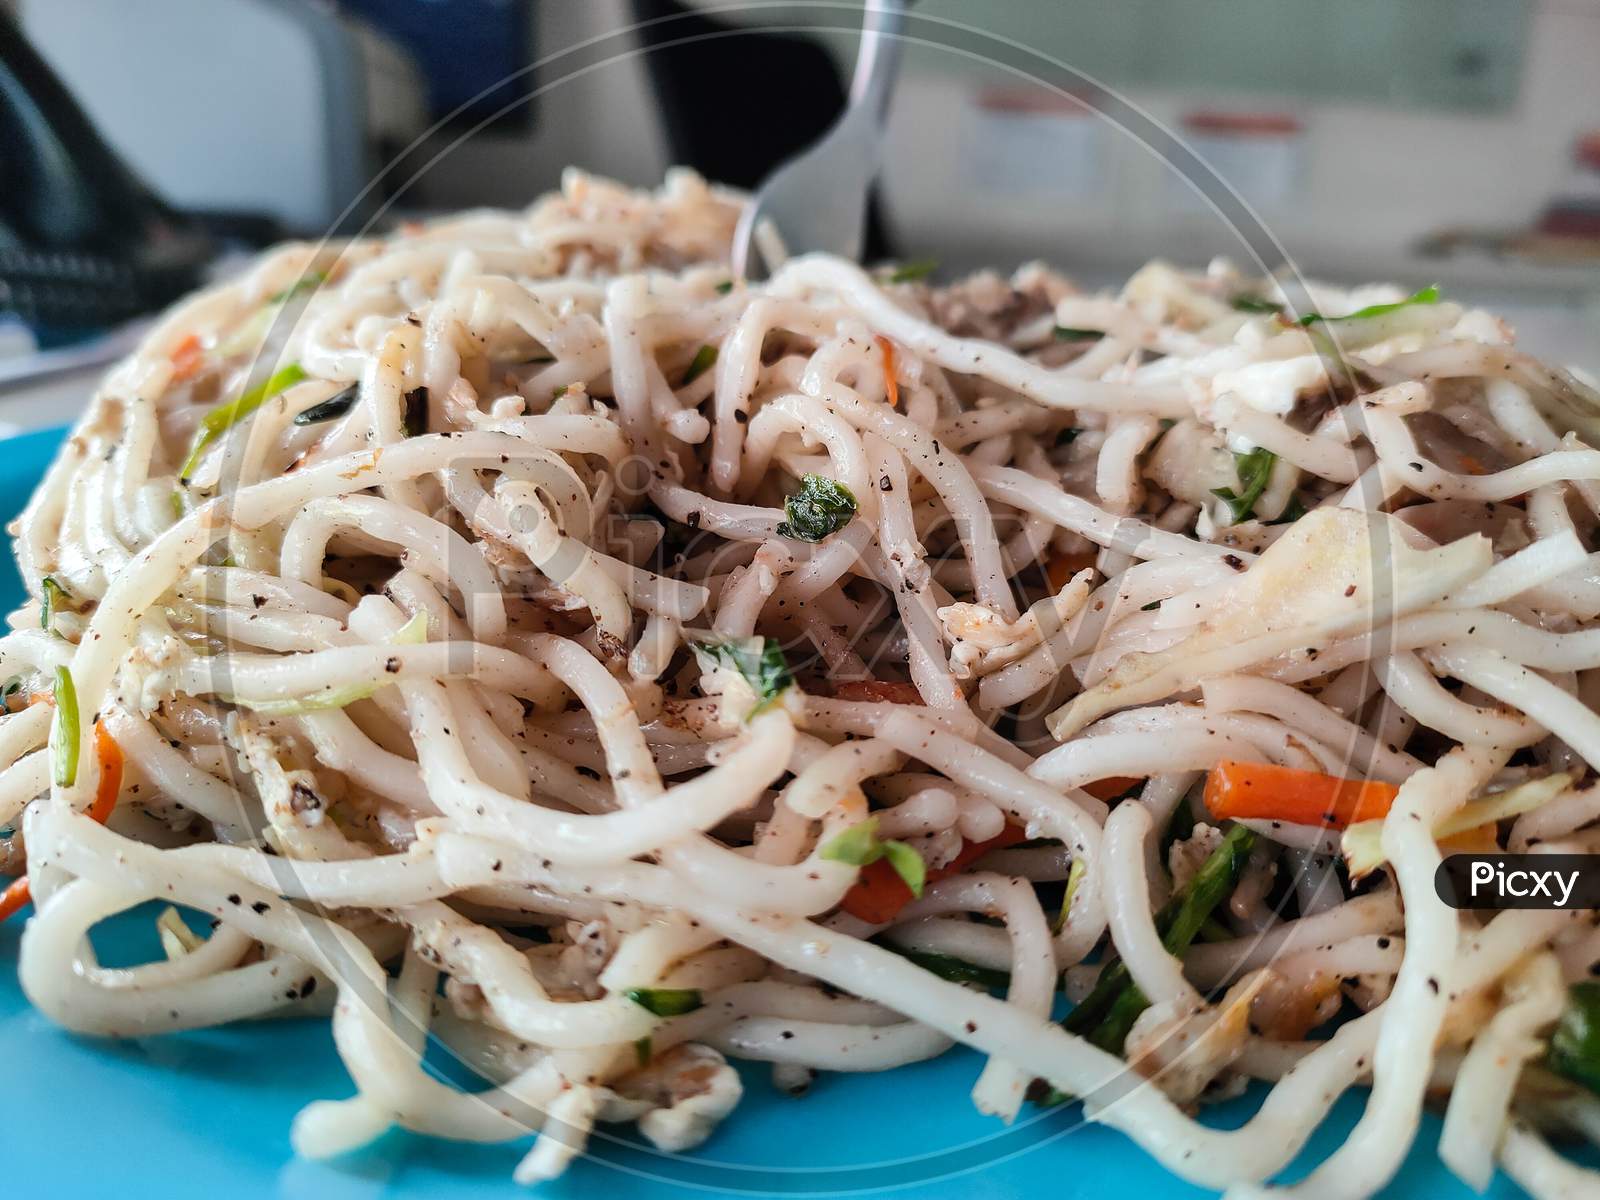 Image Of Street Food Or Home Made Food Noodles Or Chowmein